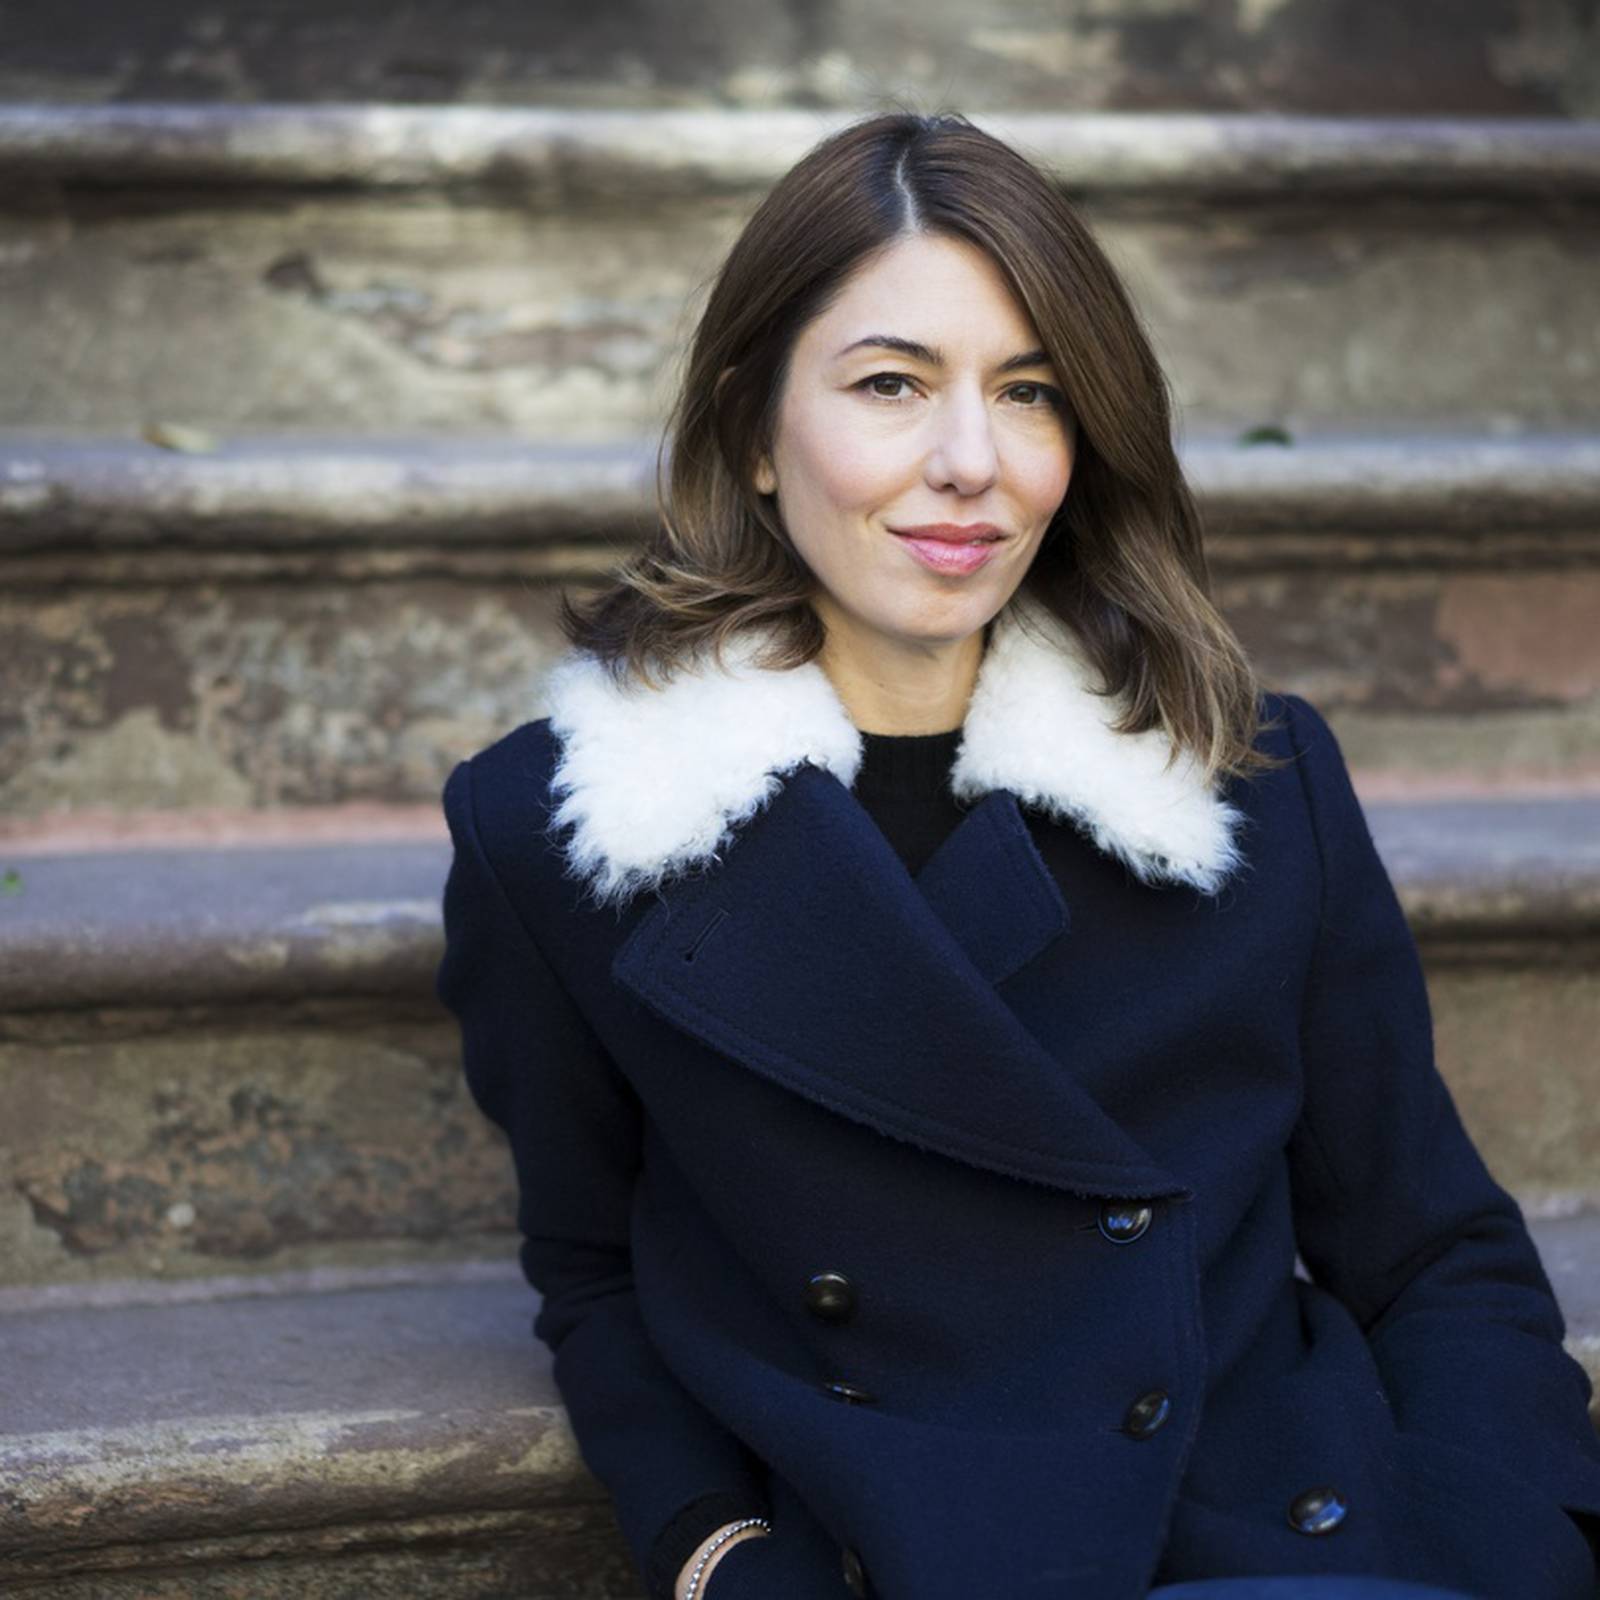 Sofia Coppola Has Never Heard of the Bechdel Test, But All of Her Movies  (Sort of) Pass It